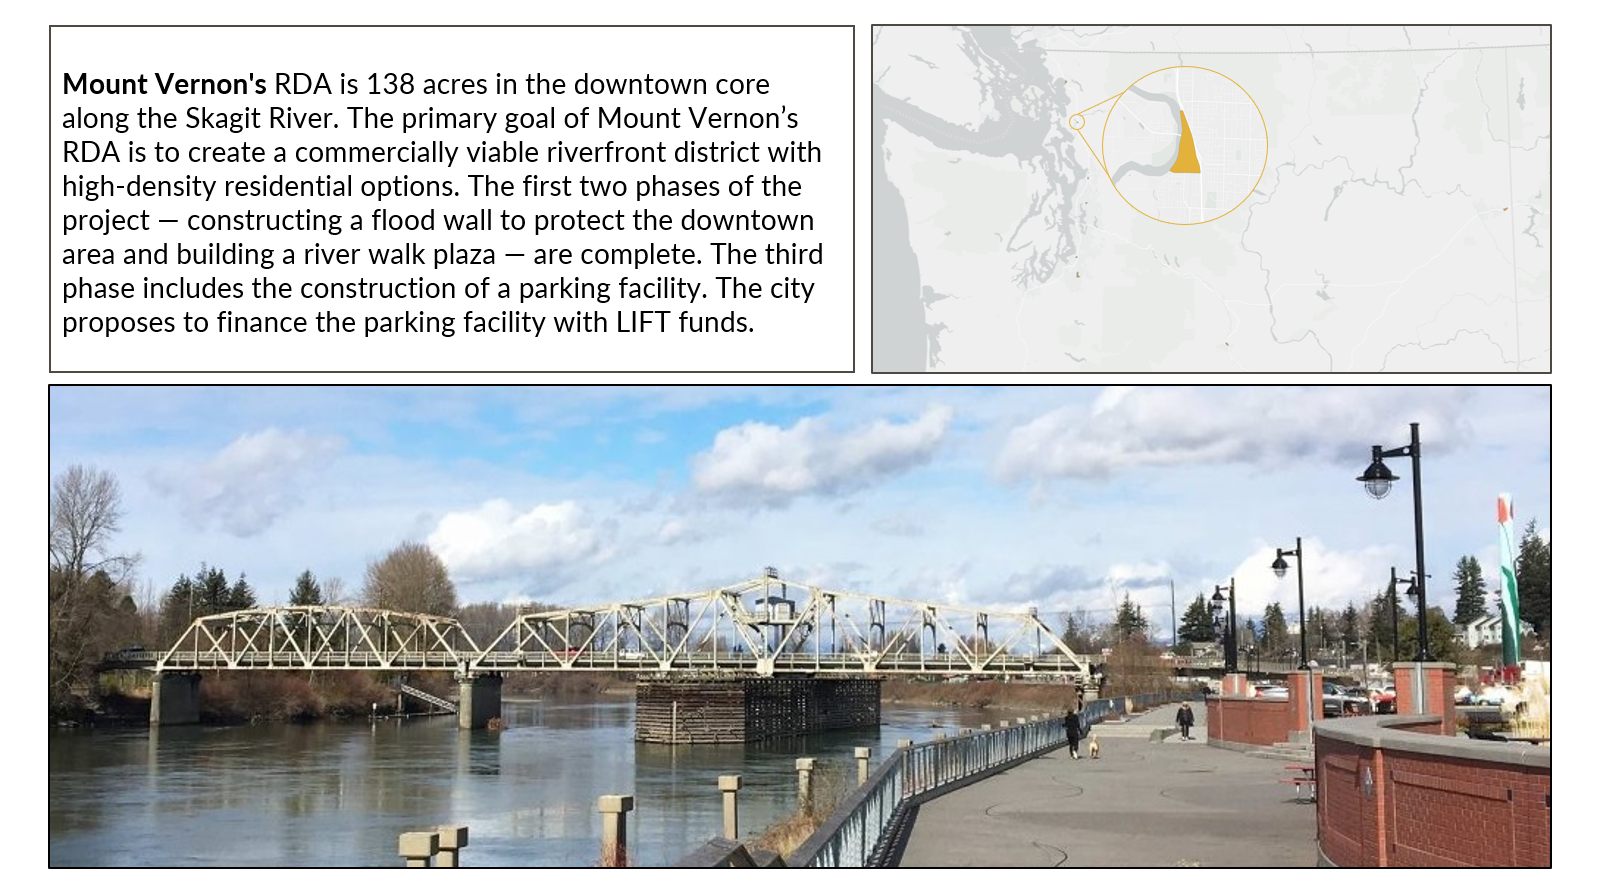 Grpahic showing map of RDA in Washington, a photo in that RDA, and the following text: Mount Vernon's RDA is 138 acres in the downtown core along the Skagit River. The primary goal of Mount Vernon’s RDA is to create a commercially viable riverfront district with high-density residential options. The first two phases of the project — constructing a flood wall to protect the downtown area and building a river walk plaza — are complete. The third phase includes the construction of a parking facility. The city proposes to finance the parking facility with LIFT funds. 
                  